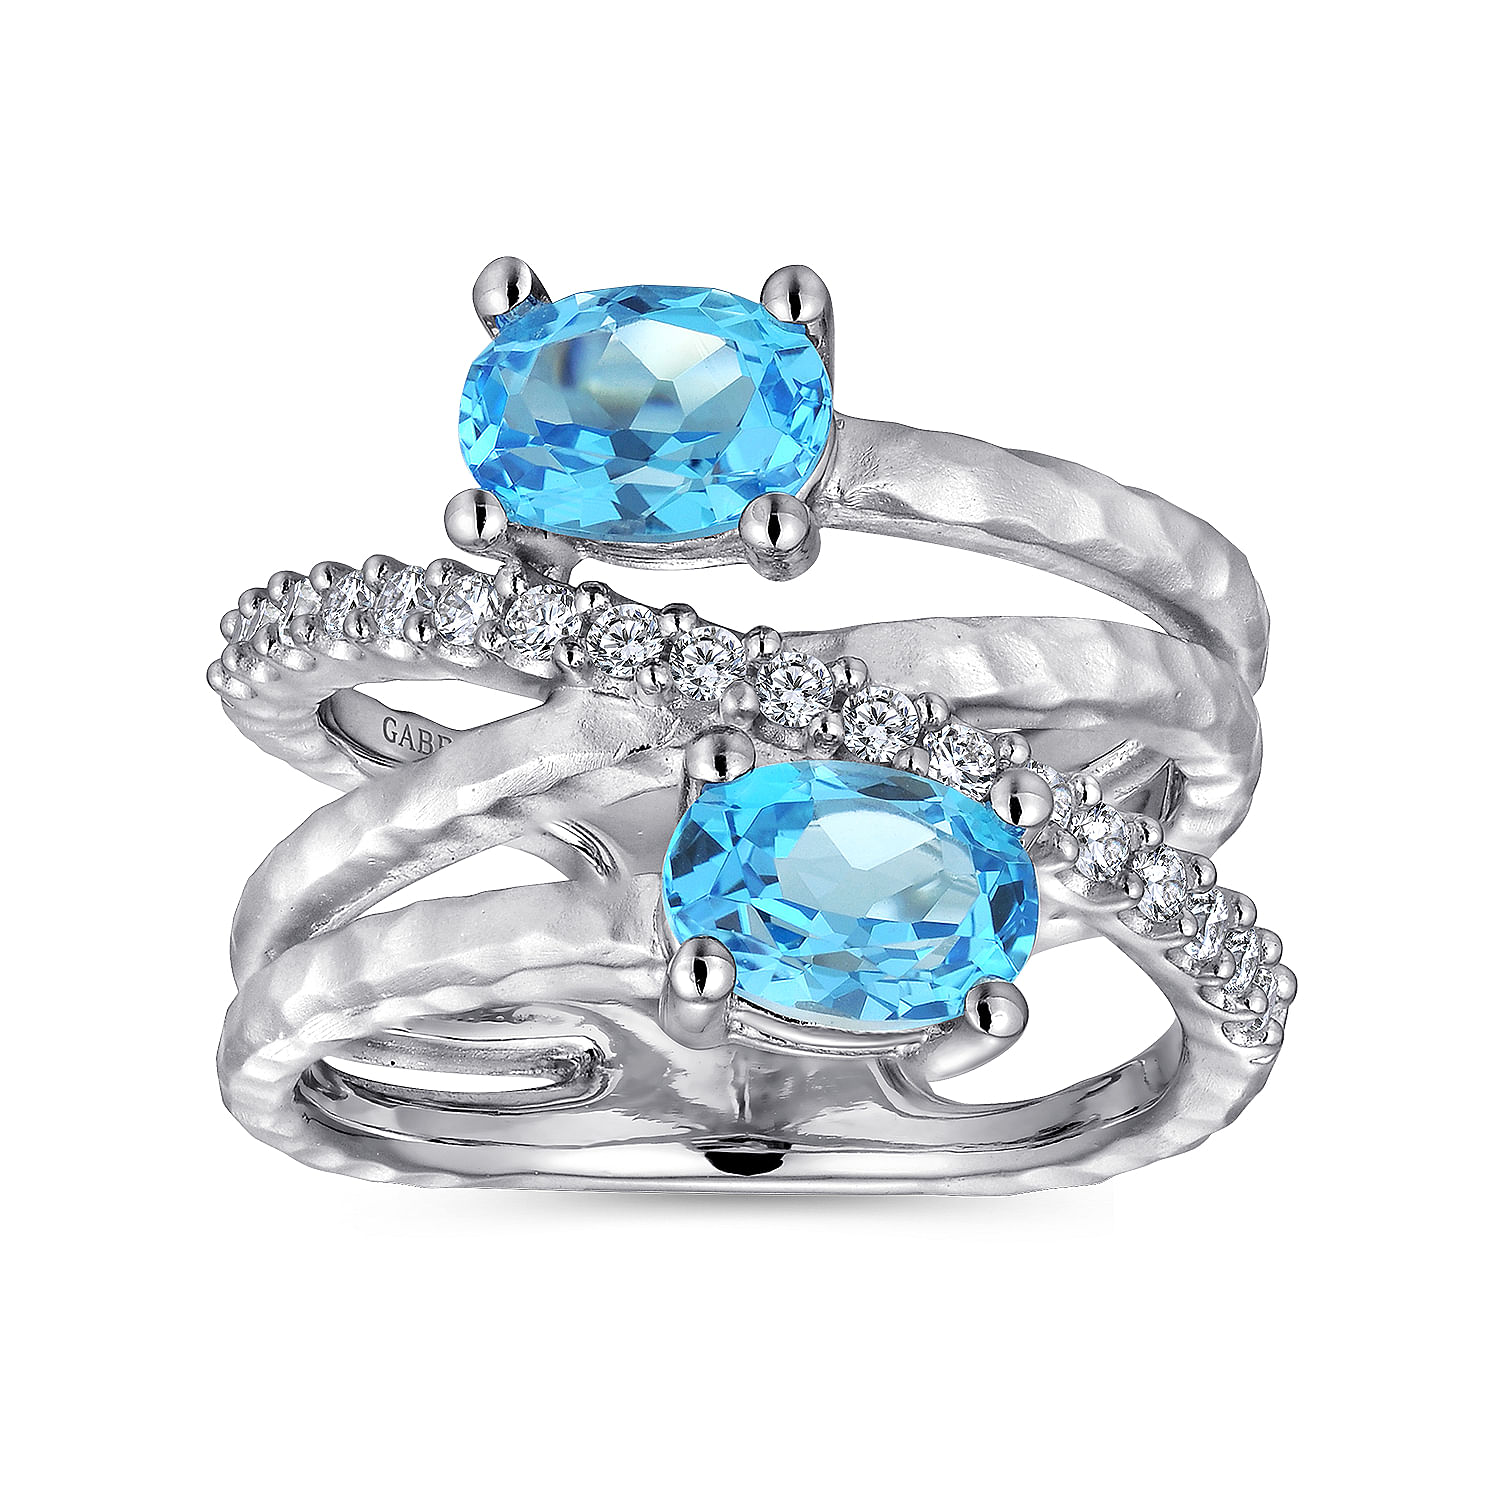 925 Sterling Silver Multi Row Blue Topaz and White Sapphire Twisted Ring